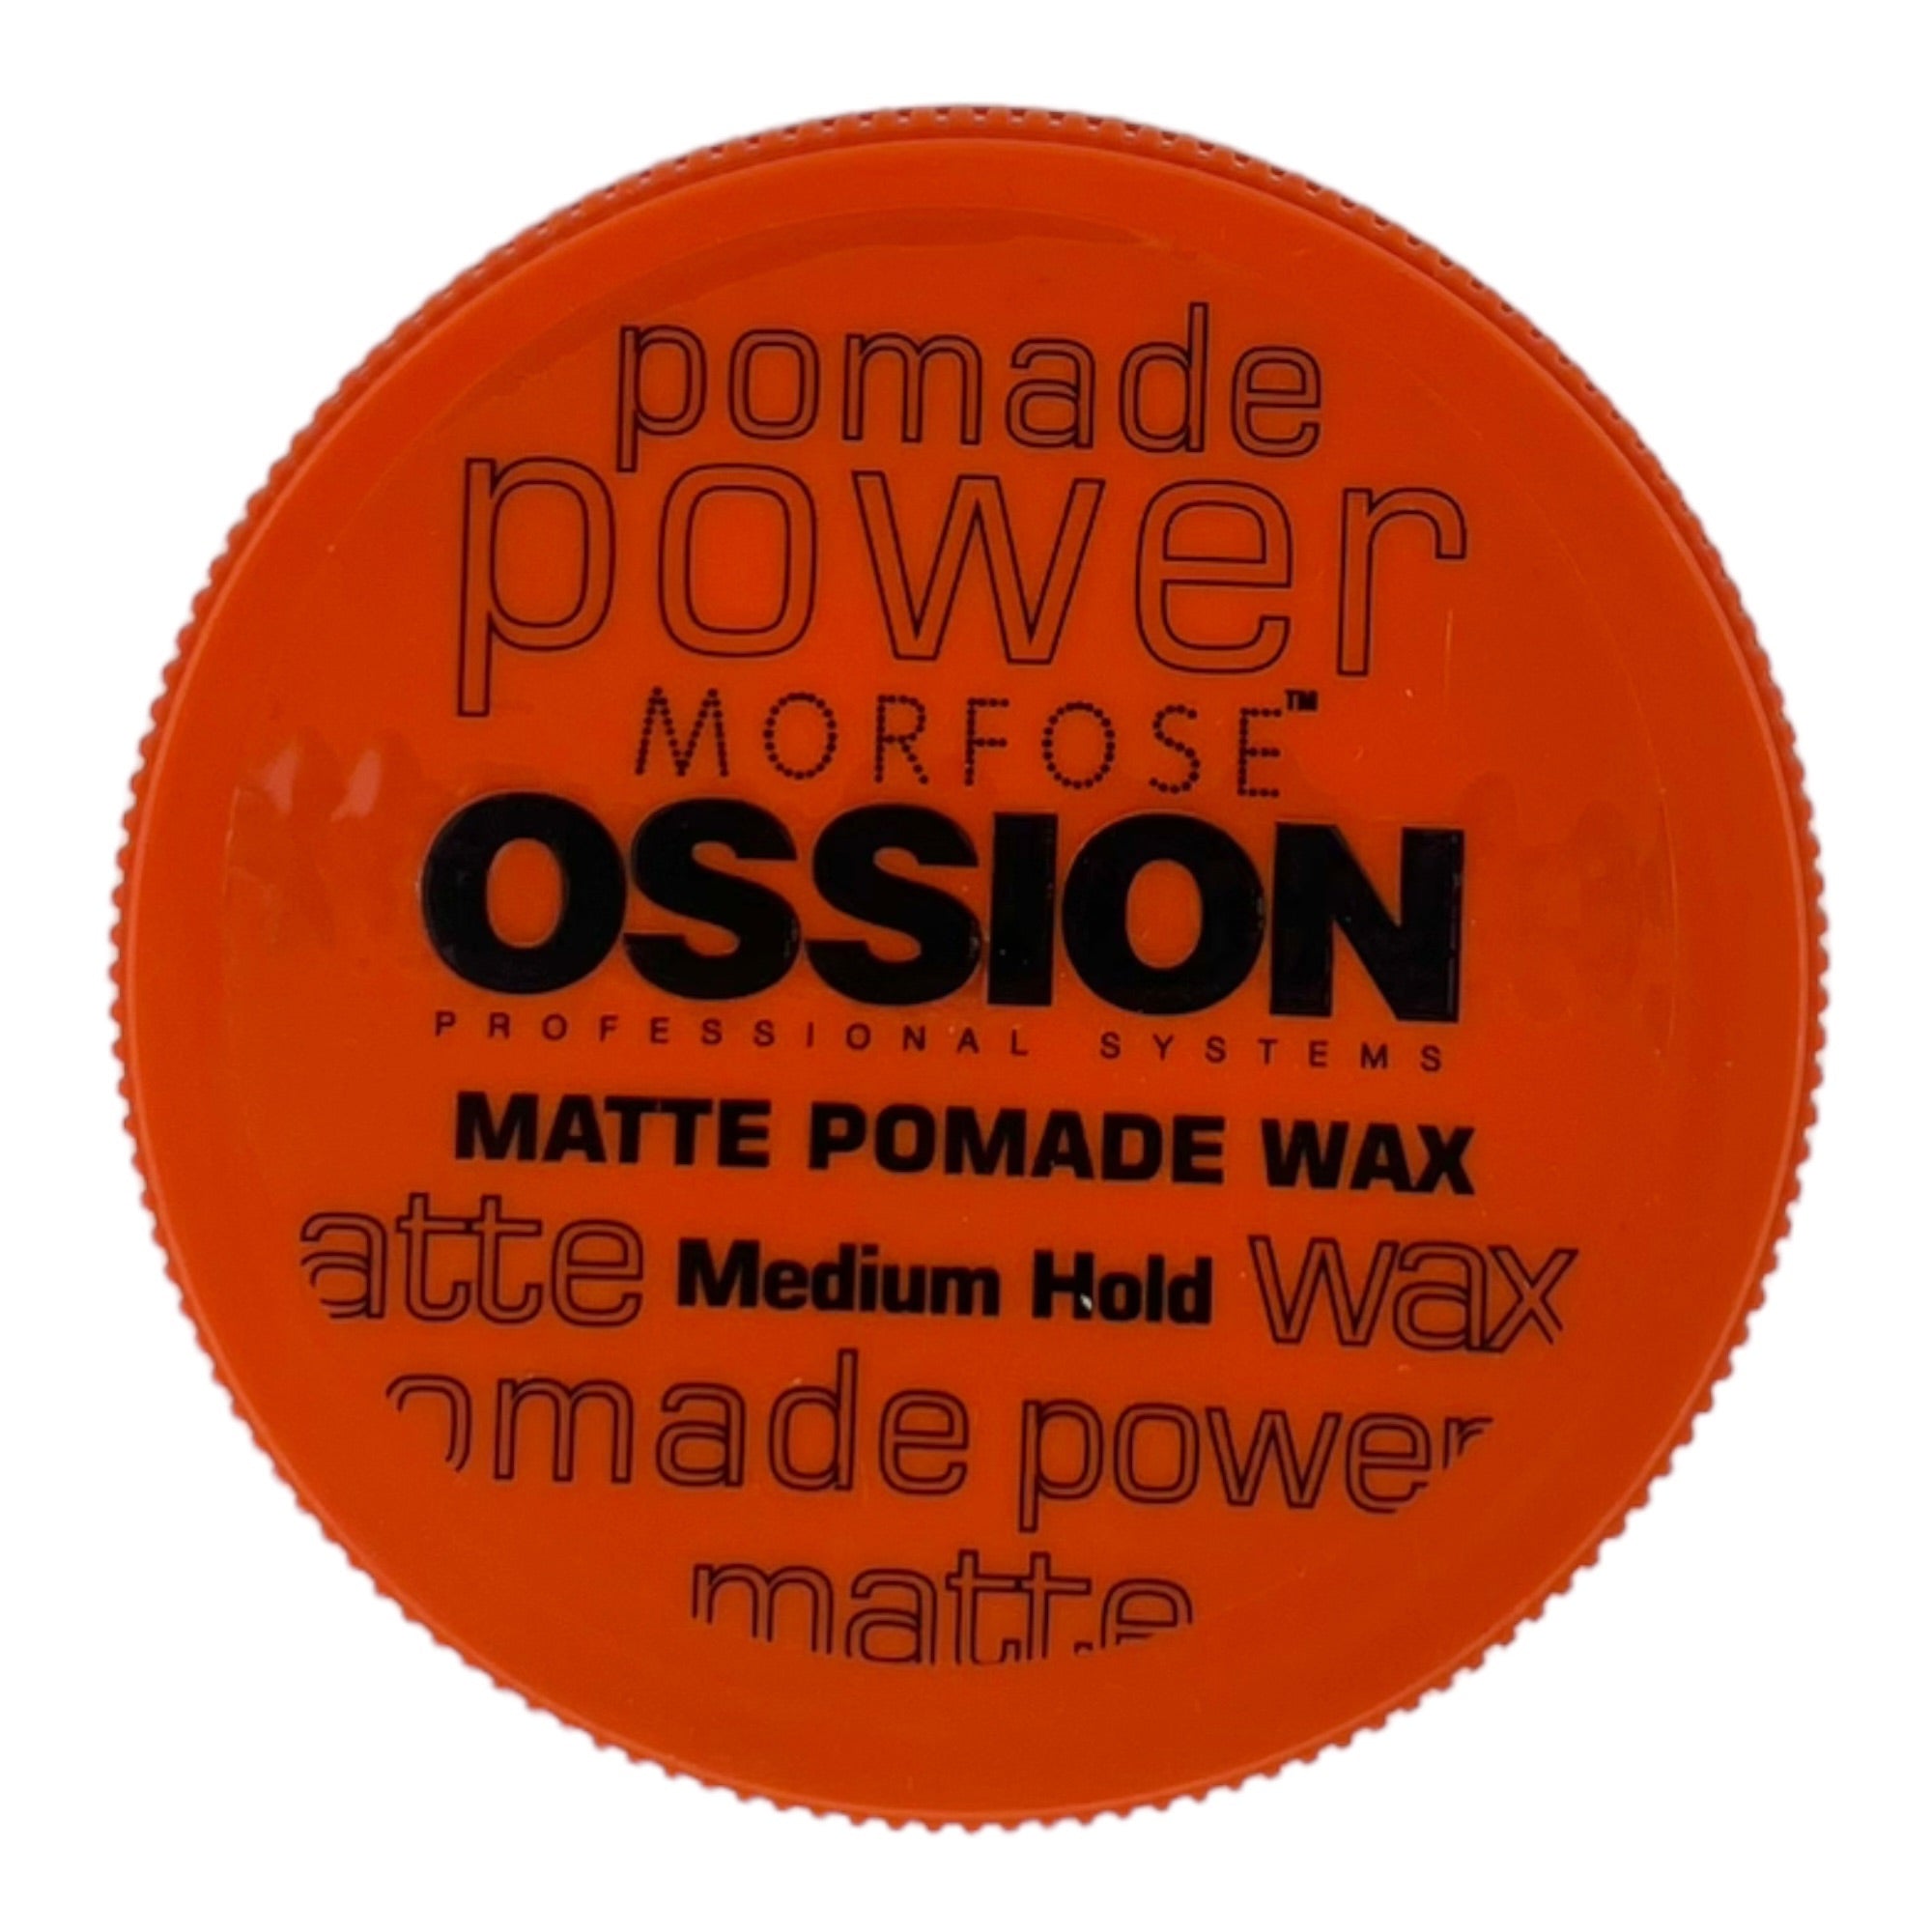 Morfose - Ossion Matte Pomade Wax 100ml